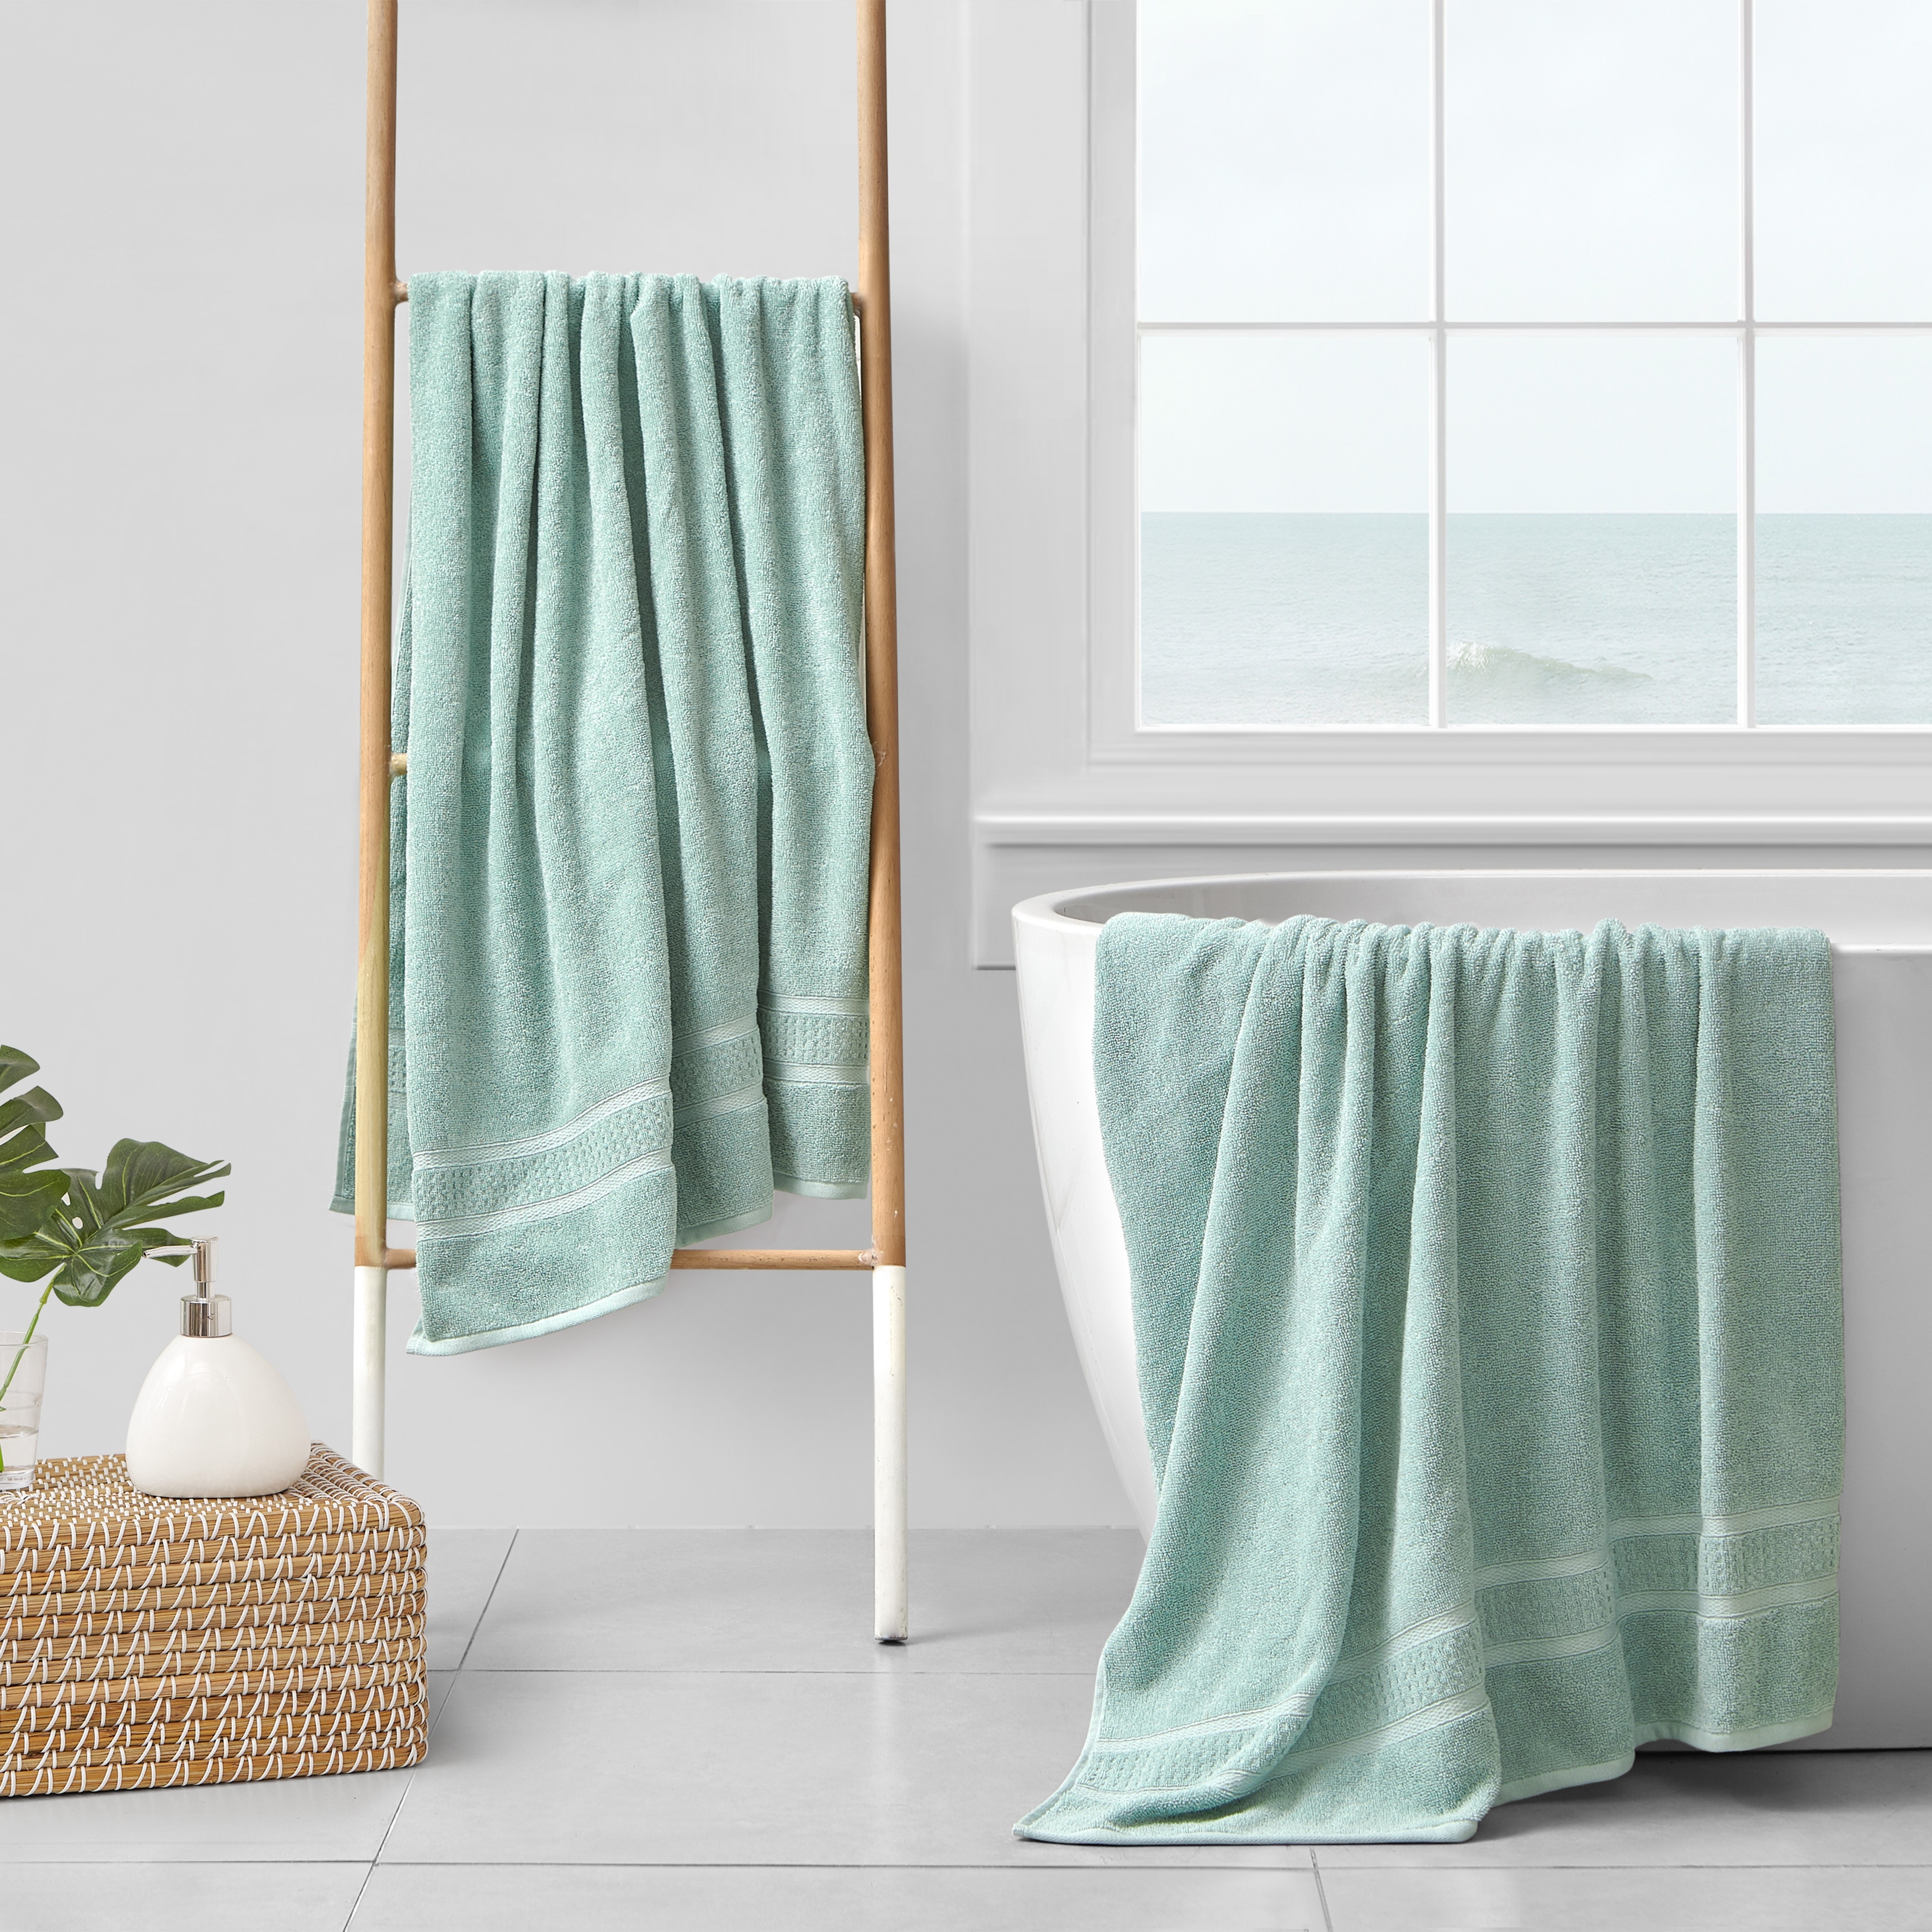 https://ak1.ostkcdn.com/images/products/is/images/direct/a44c044058ec49352cafc5ed8a09ac0ca83f85c5/Nautica-Oceane-Solid-Wellness-Towel-Collection.jpg